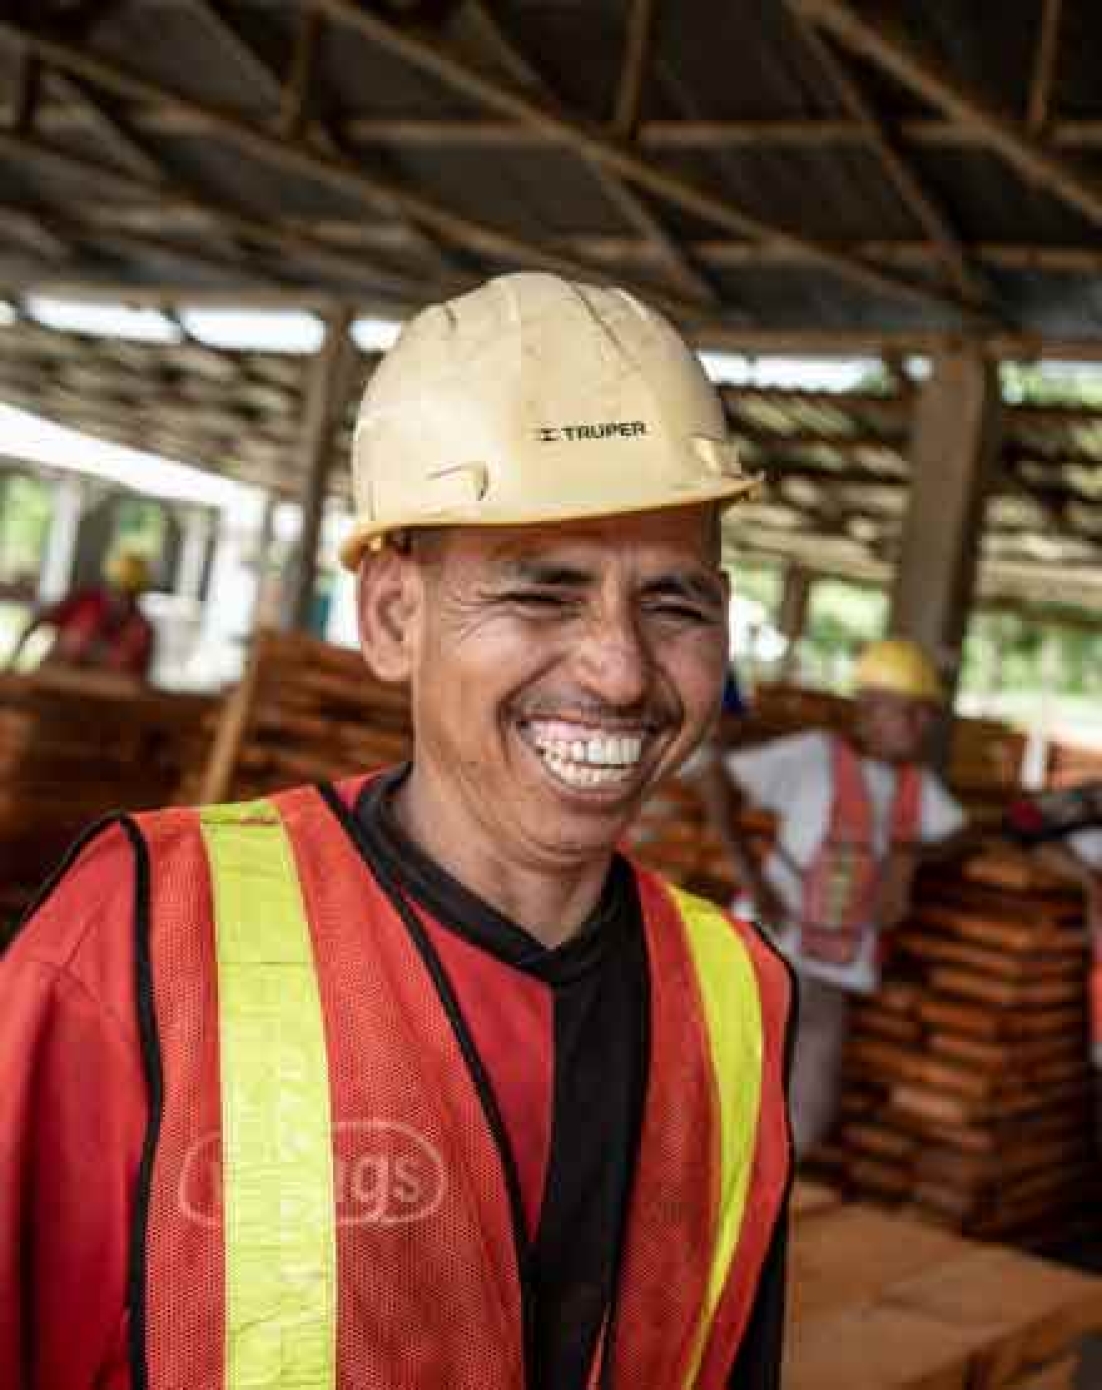 Worker smiling in a hard hat